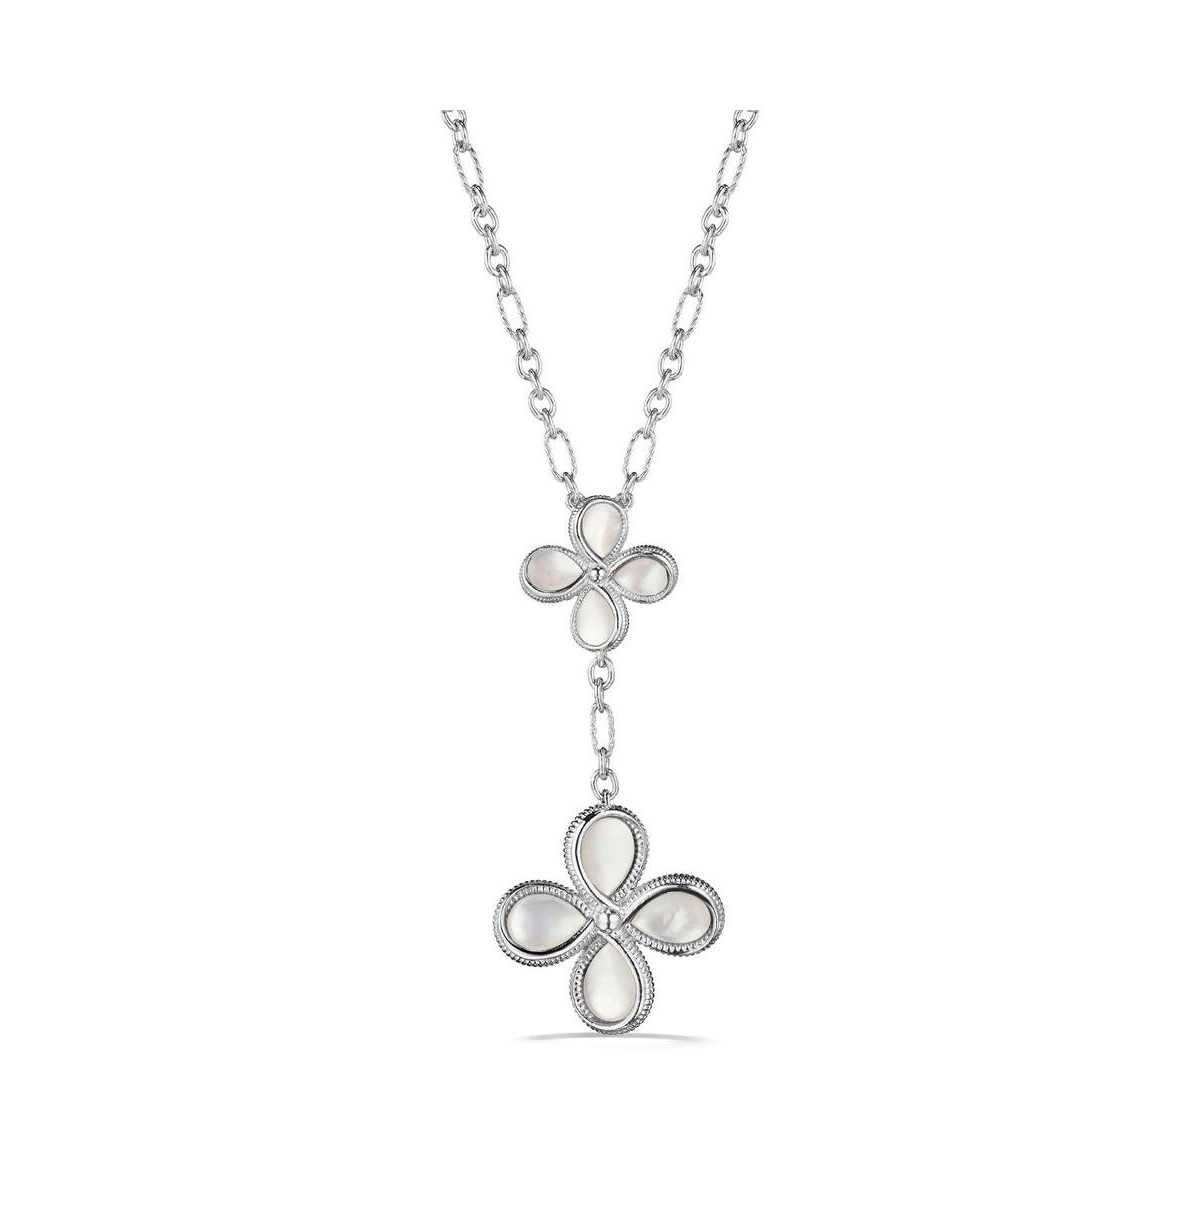 Jardin Floral Drop Necklace with Mother of Pearl - Silver/white